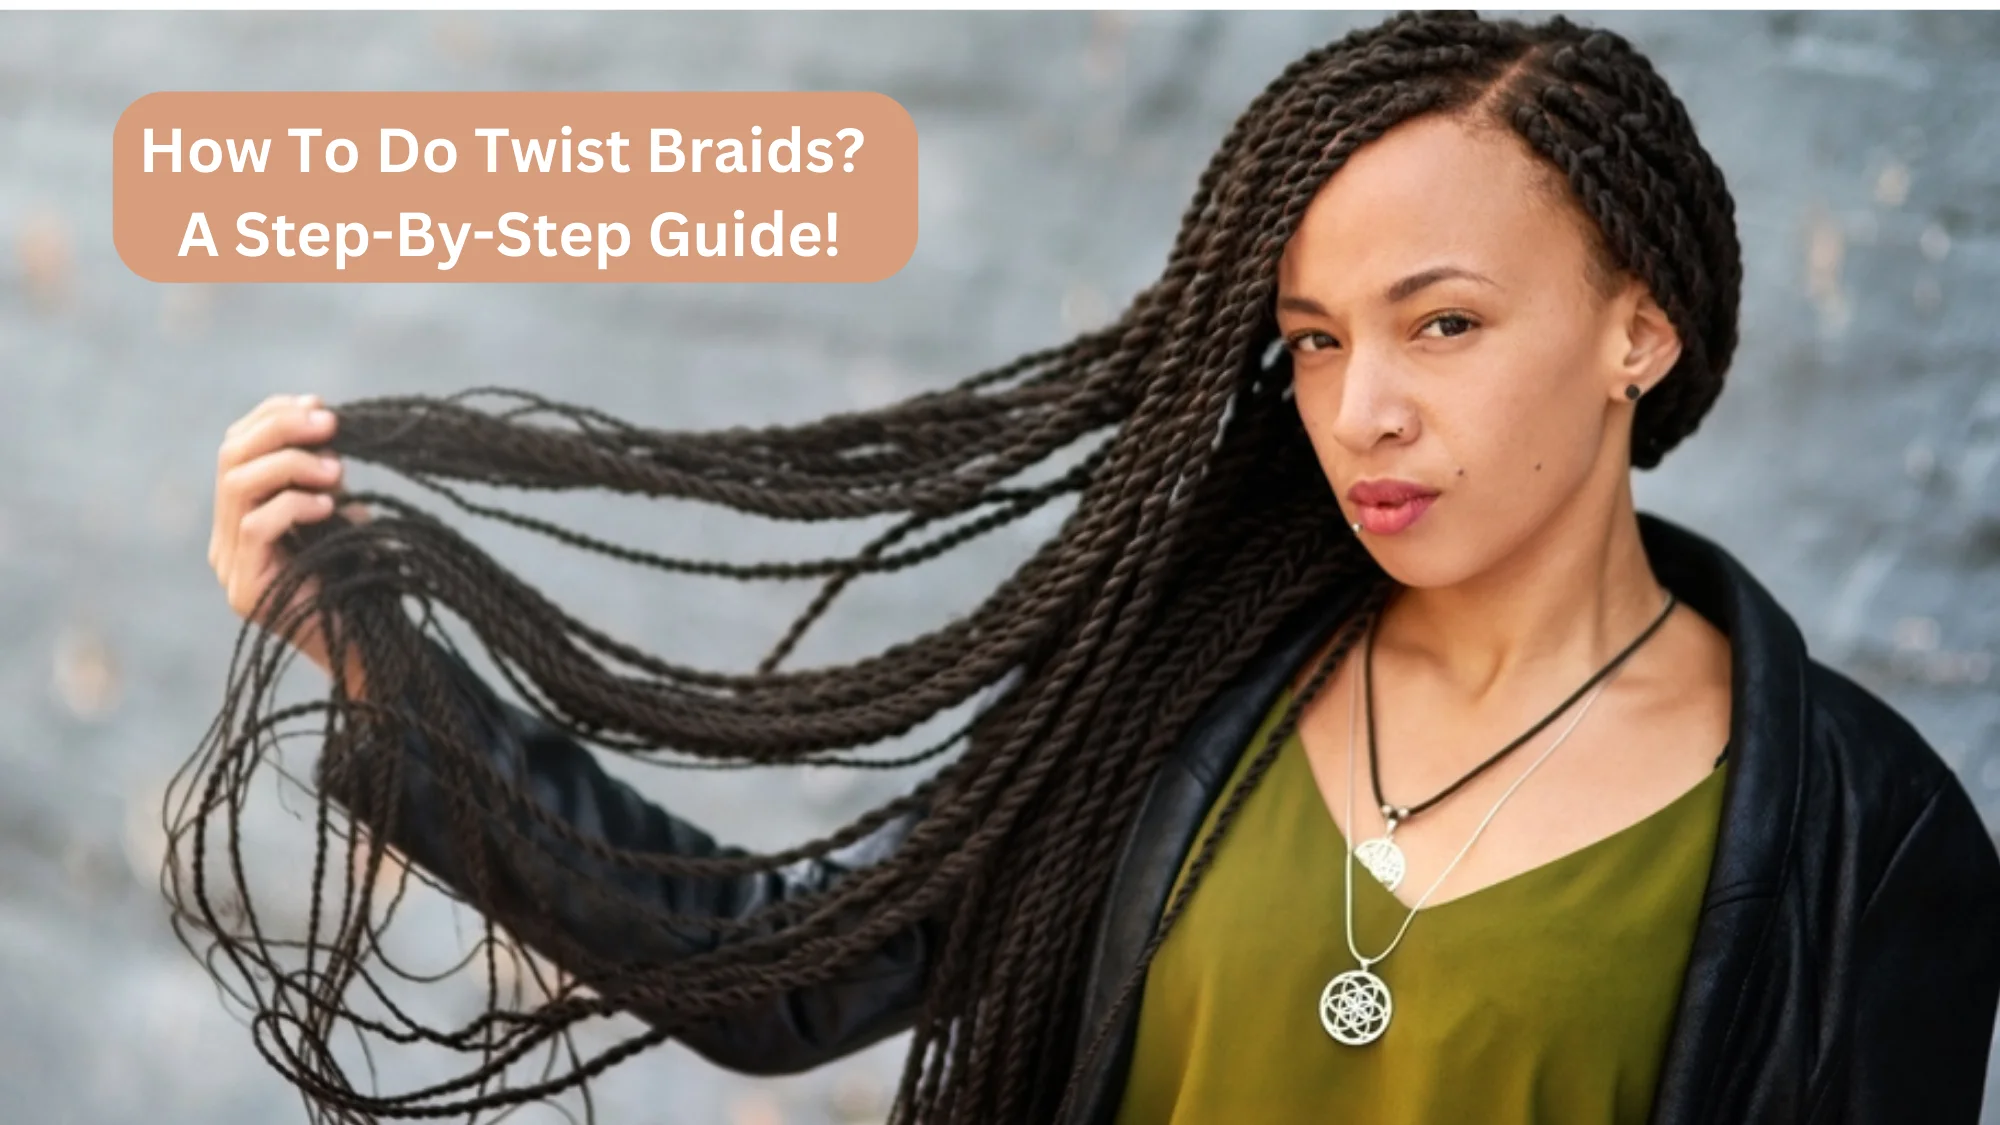 How To Do Twist Braids? A Step-By-Step Guide!